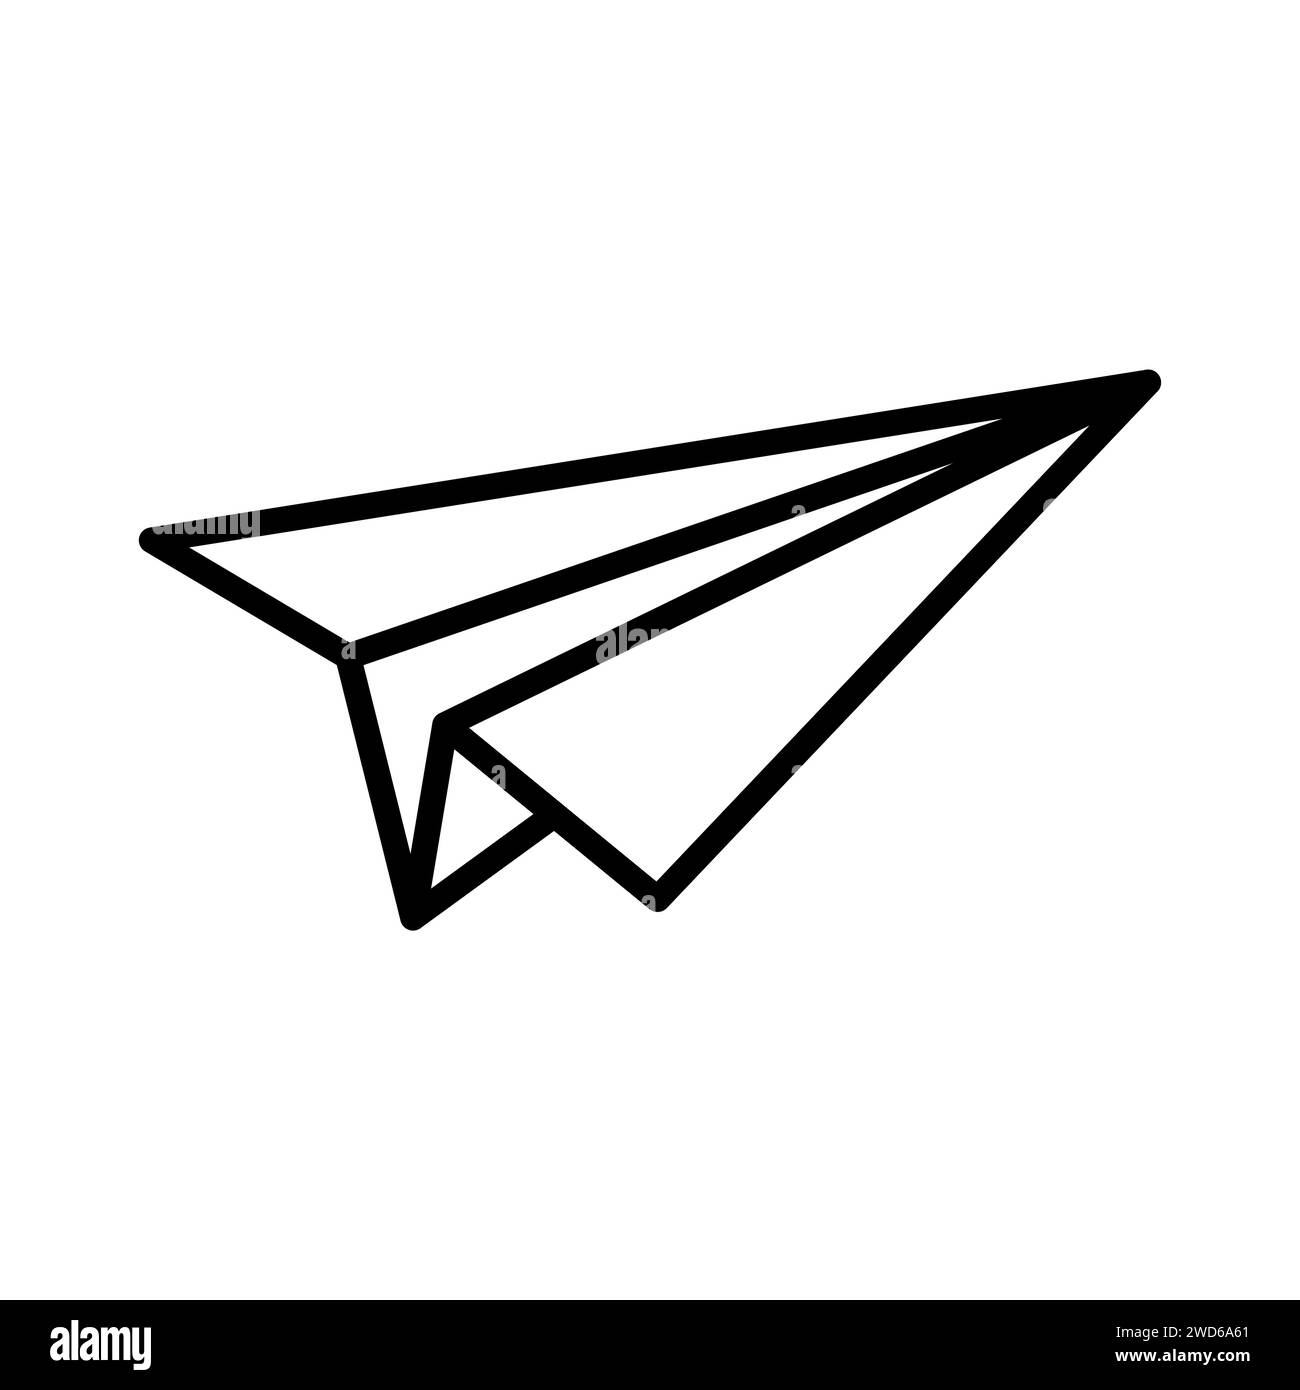 Simple paper plane black line icon. Origami paper airplane. Handmade aircraft on white background. Vector illustration. Stock Vector